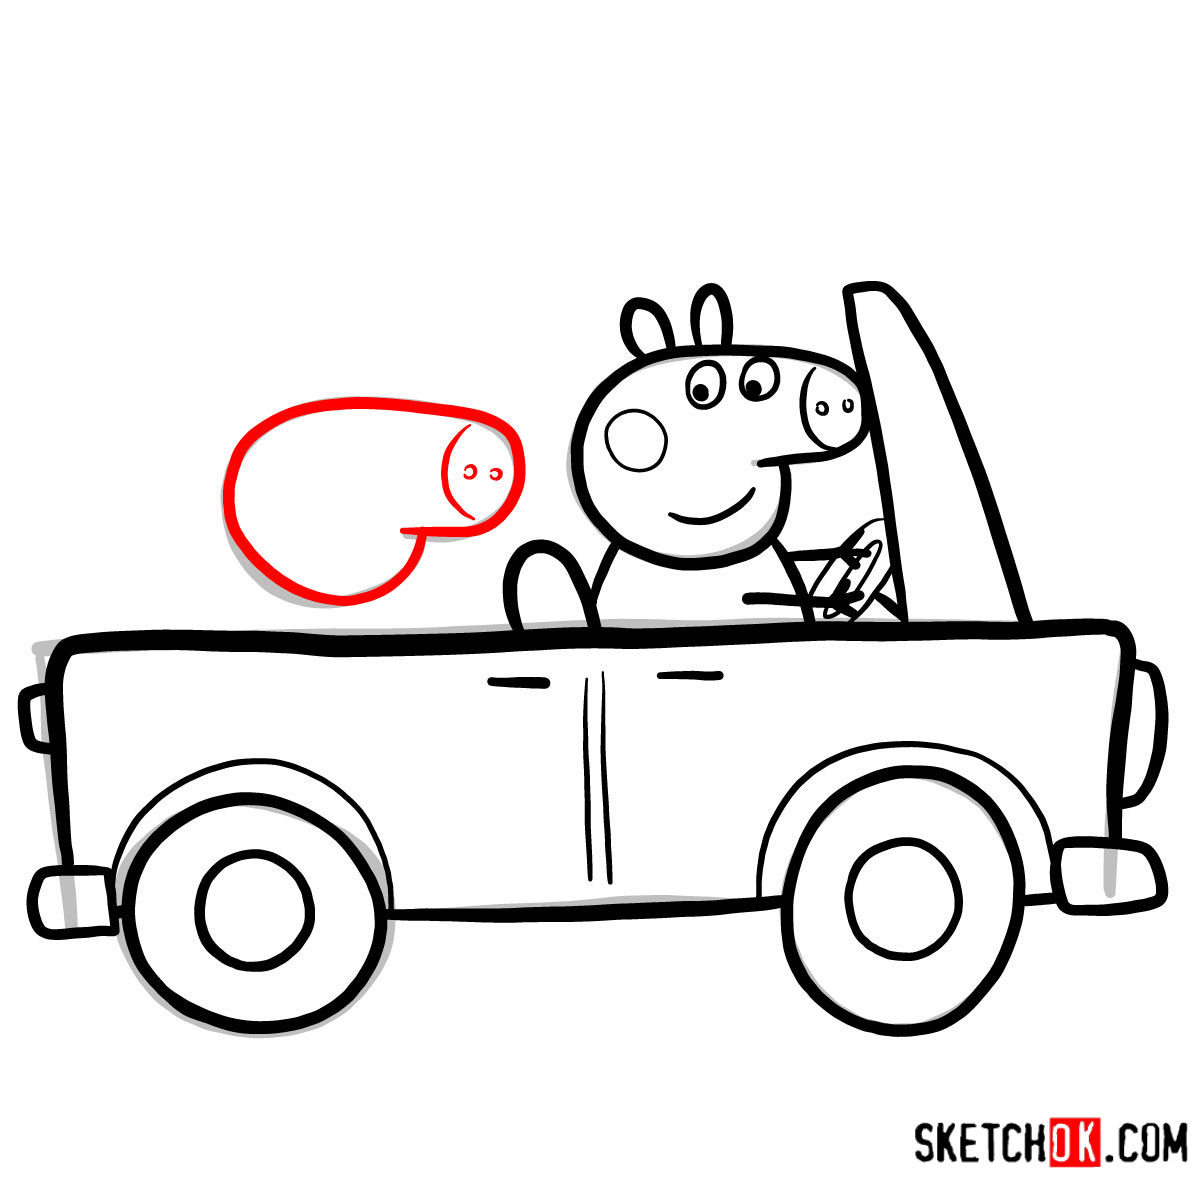 How to draw George Pig with Mummy Pig riding a car - step 09